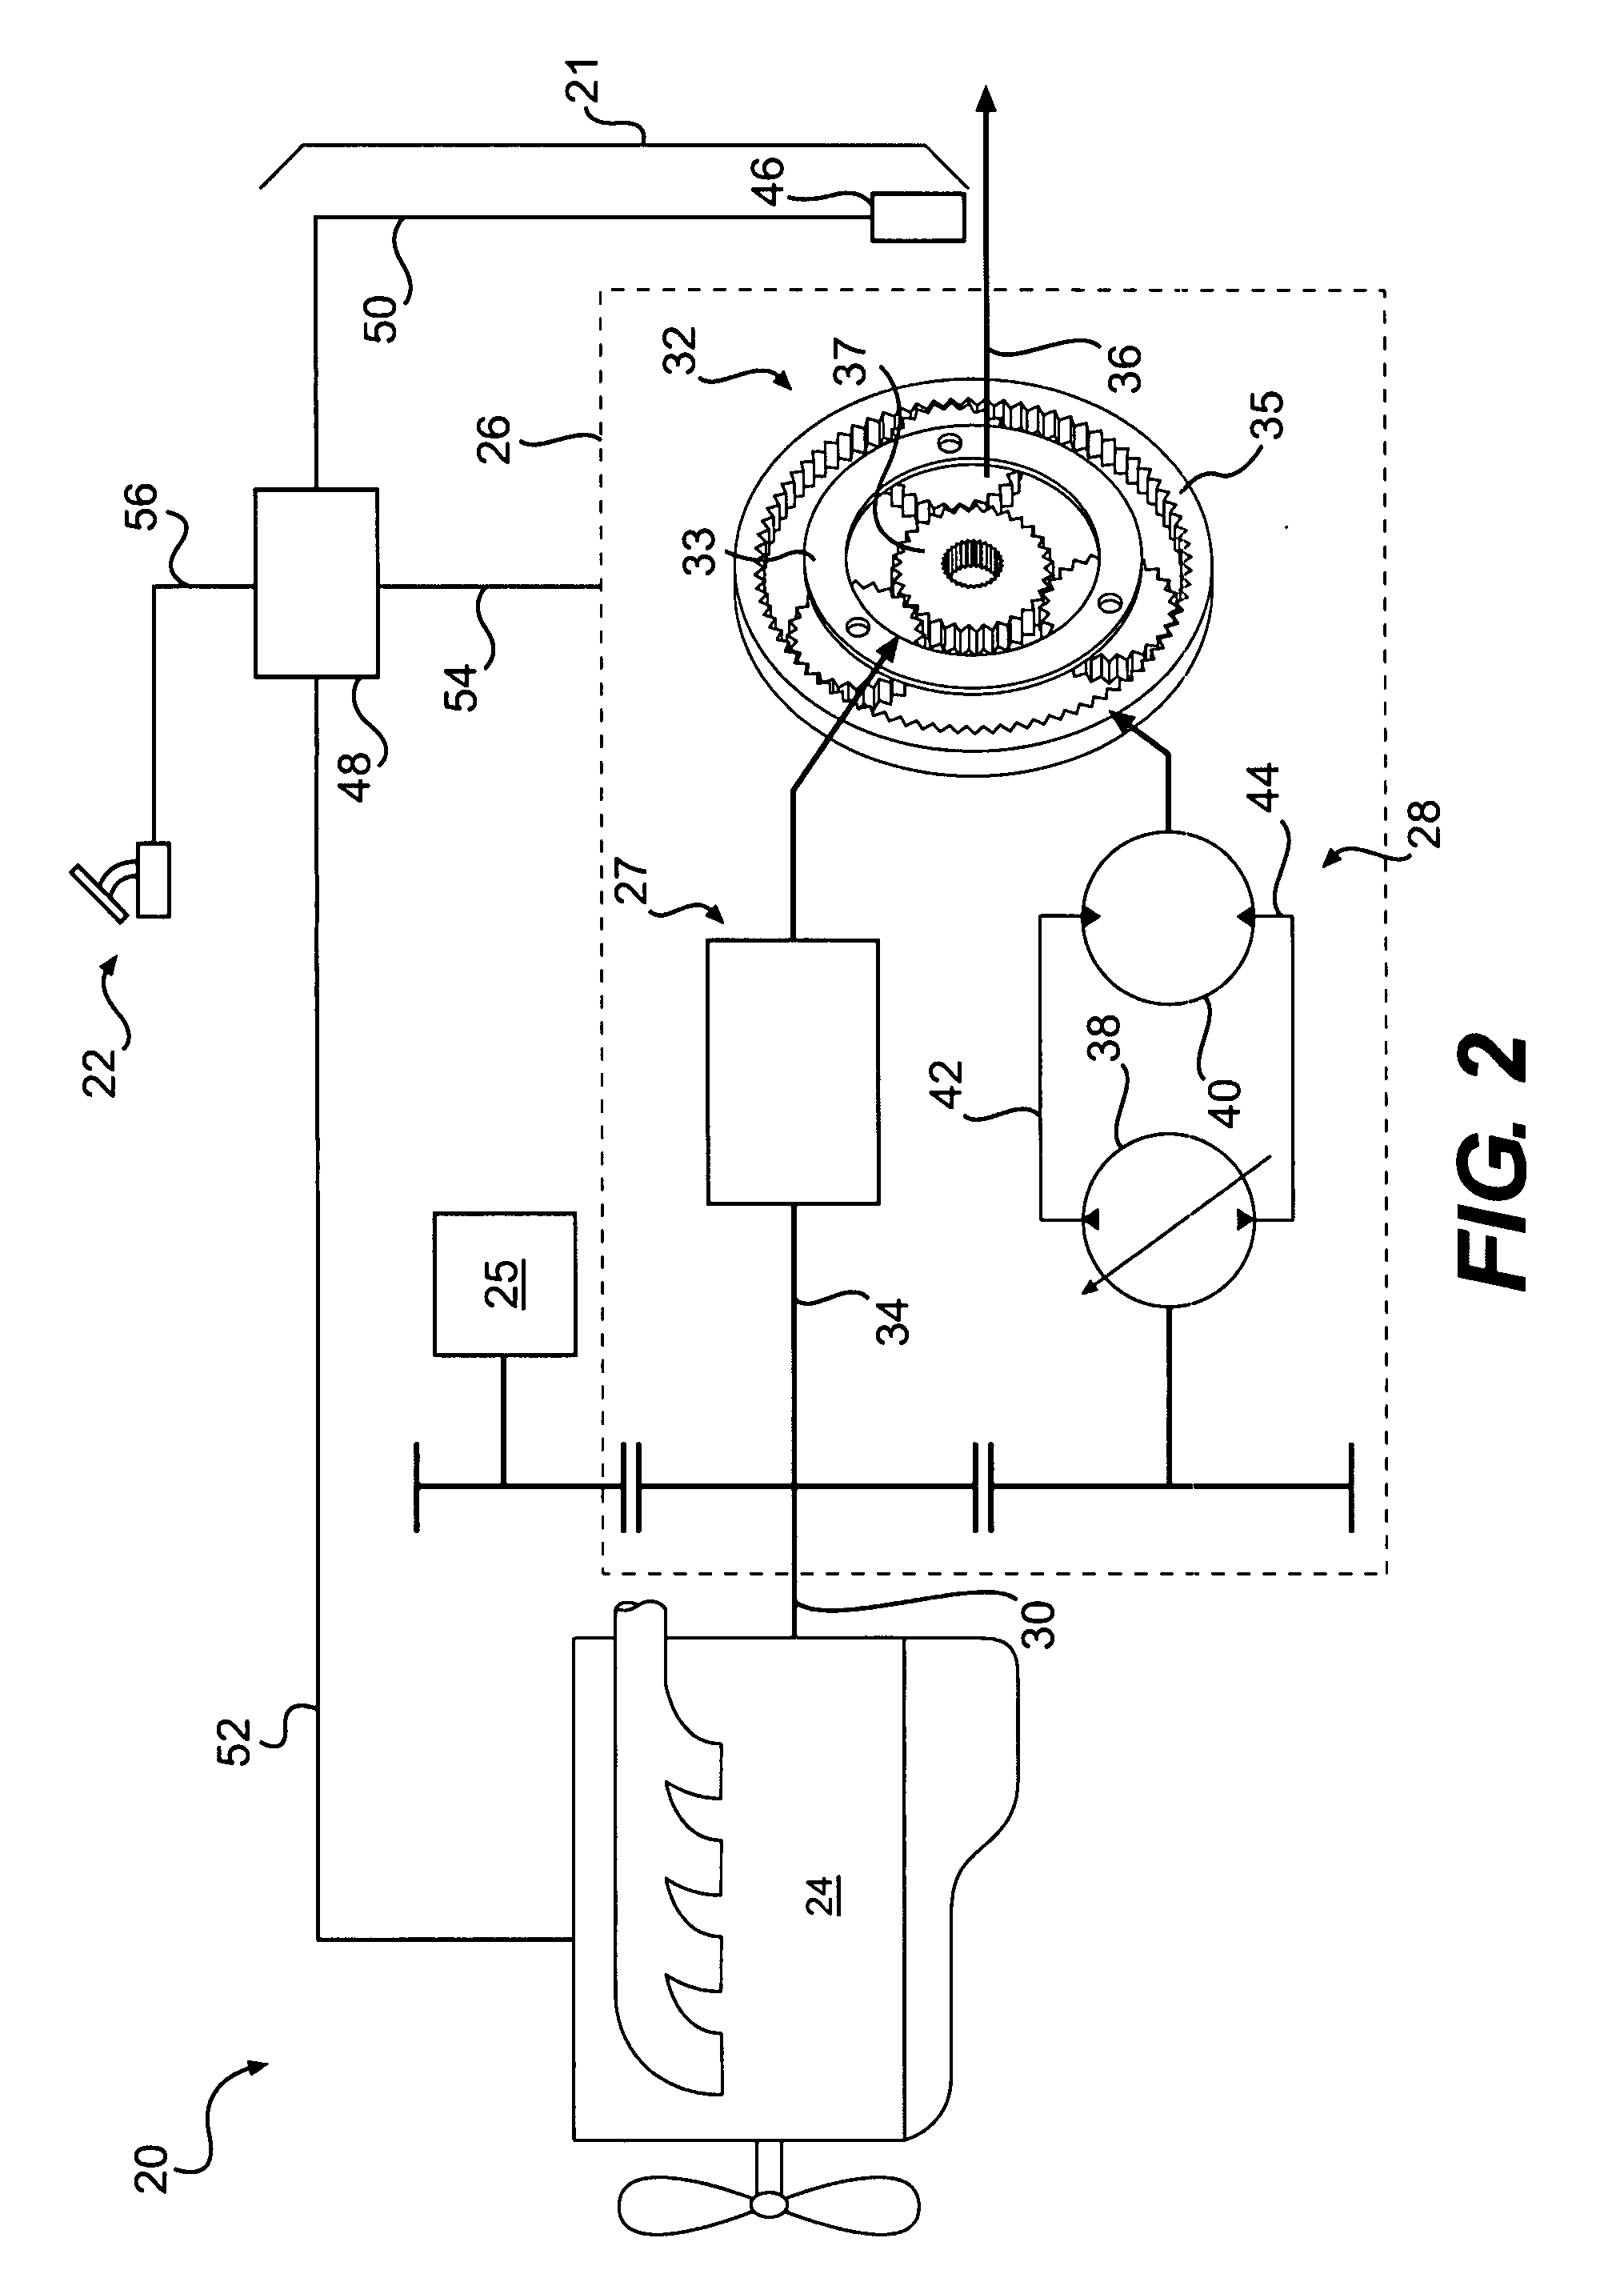 CVT control system having variable power source speed